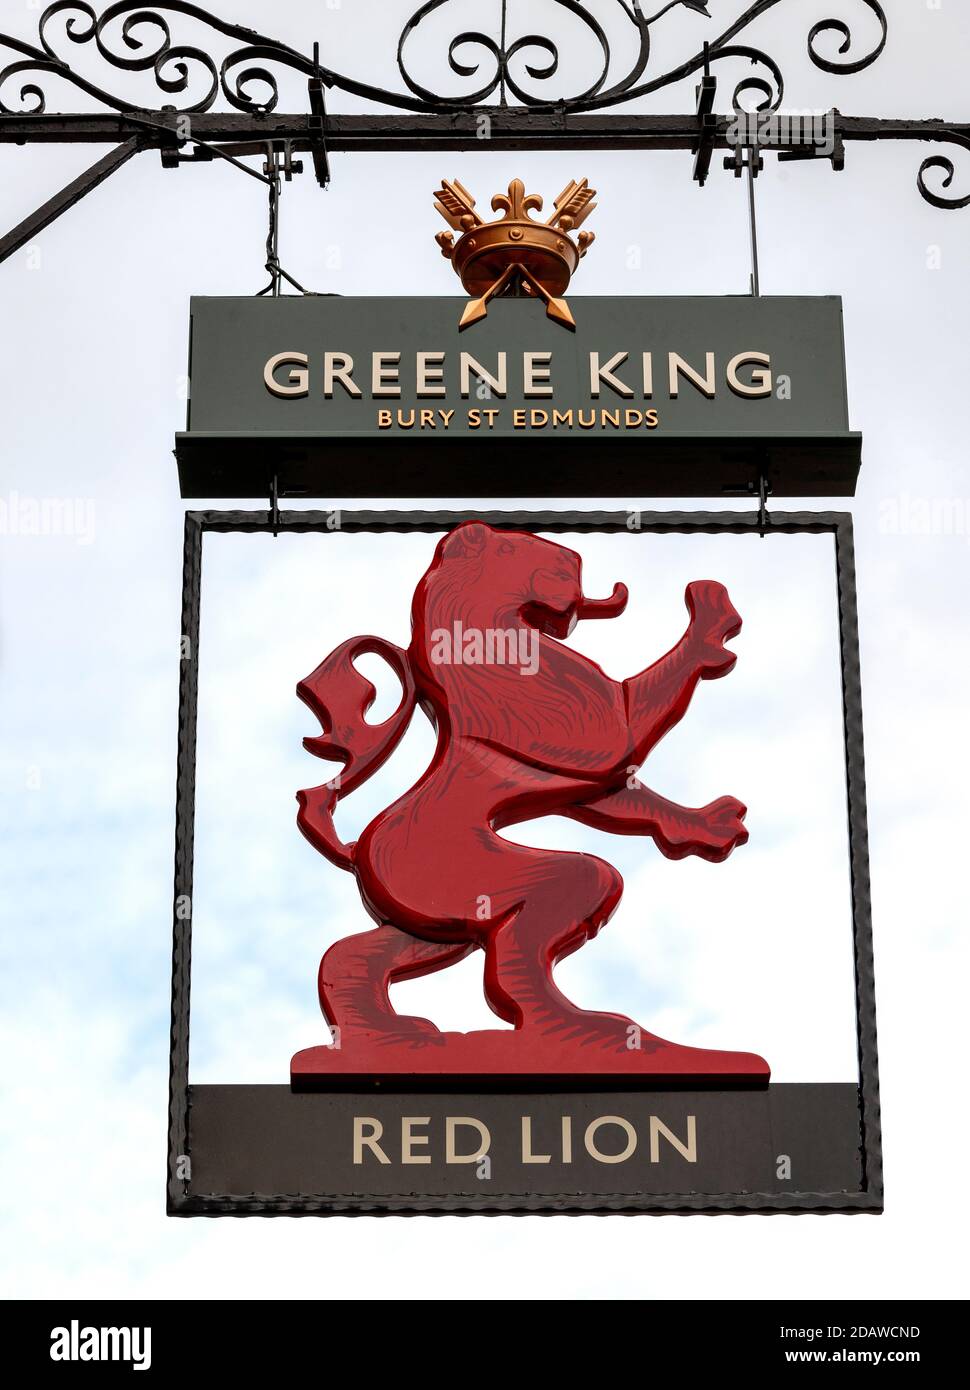 Traditional hanging pub sign at The Red Lion public house, High Street, Stevenage, Hertfordshire, England, UK. Stock Photo